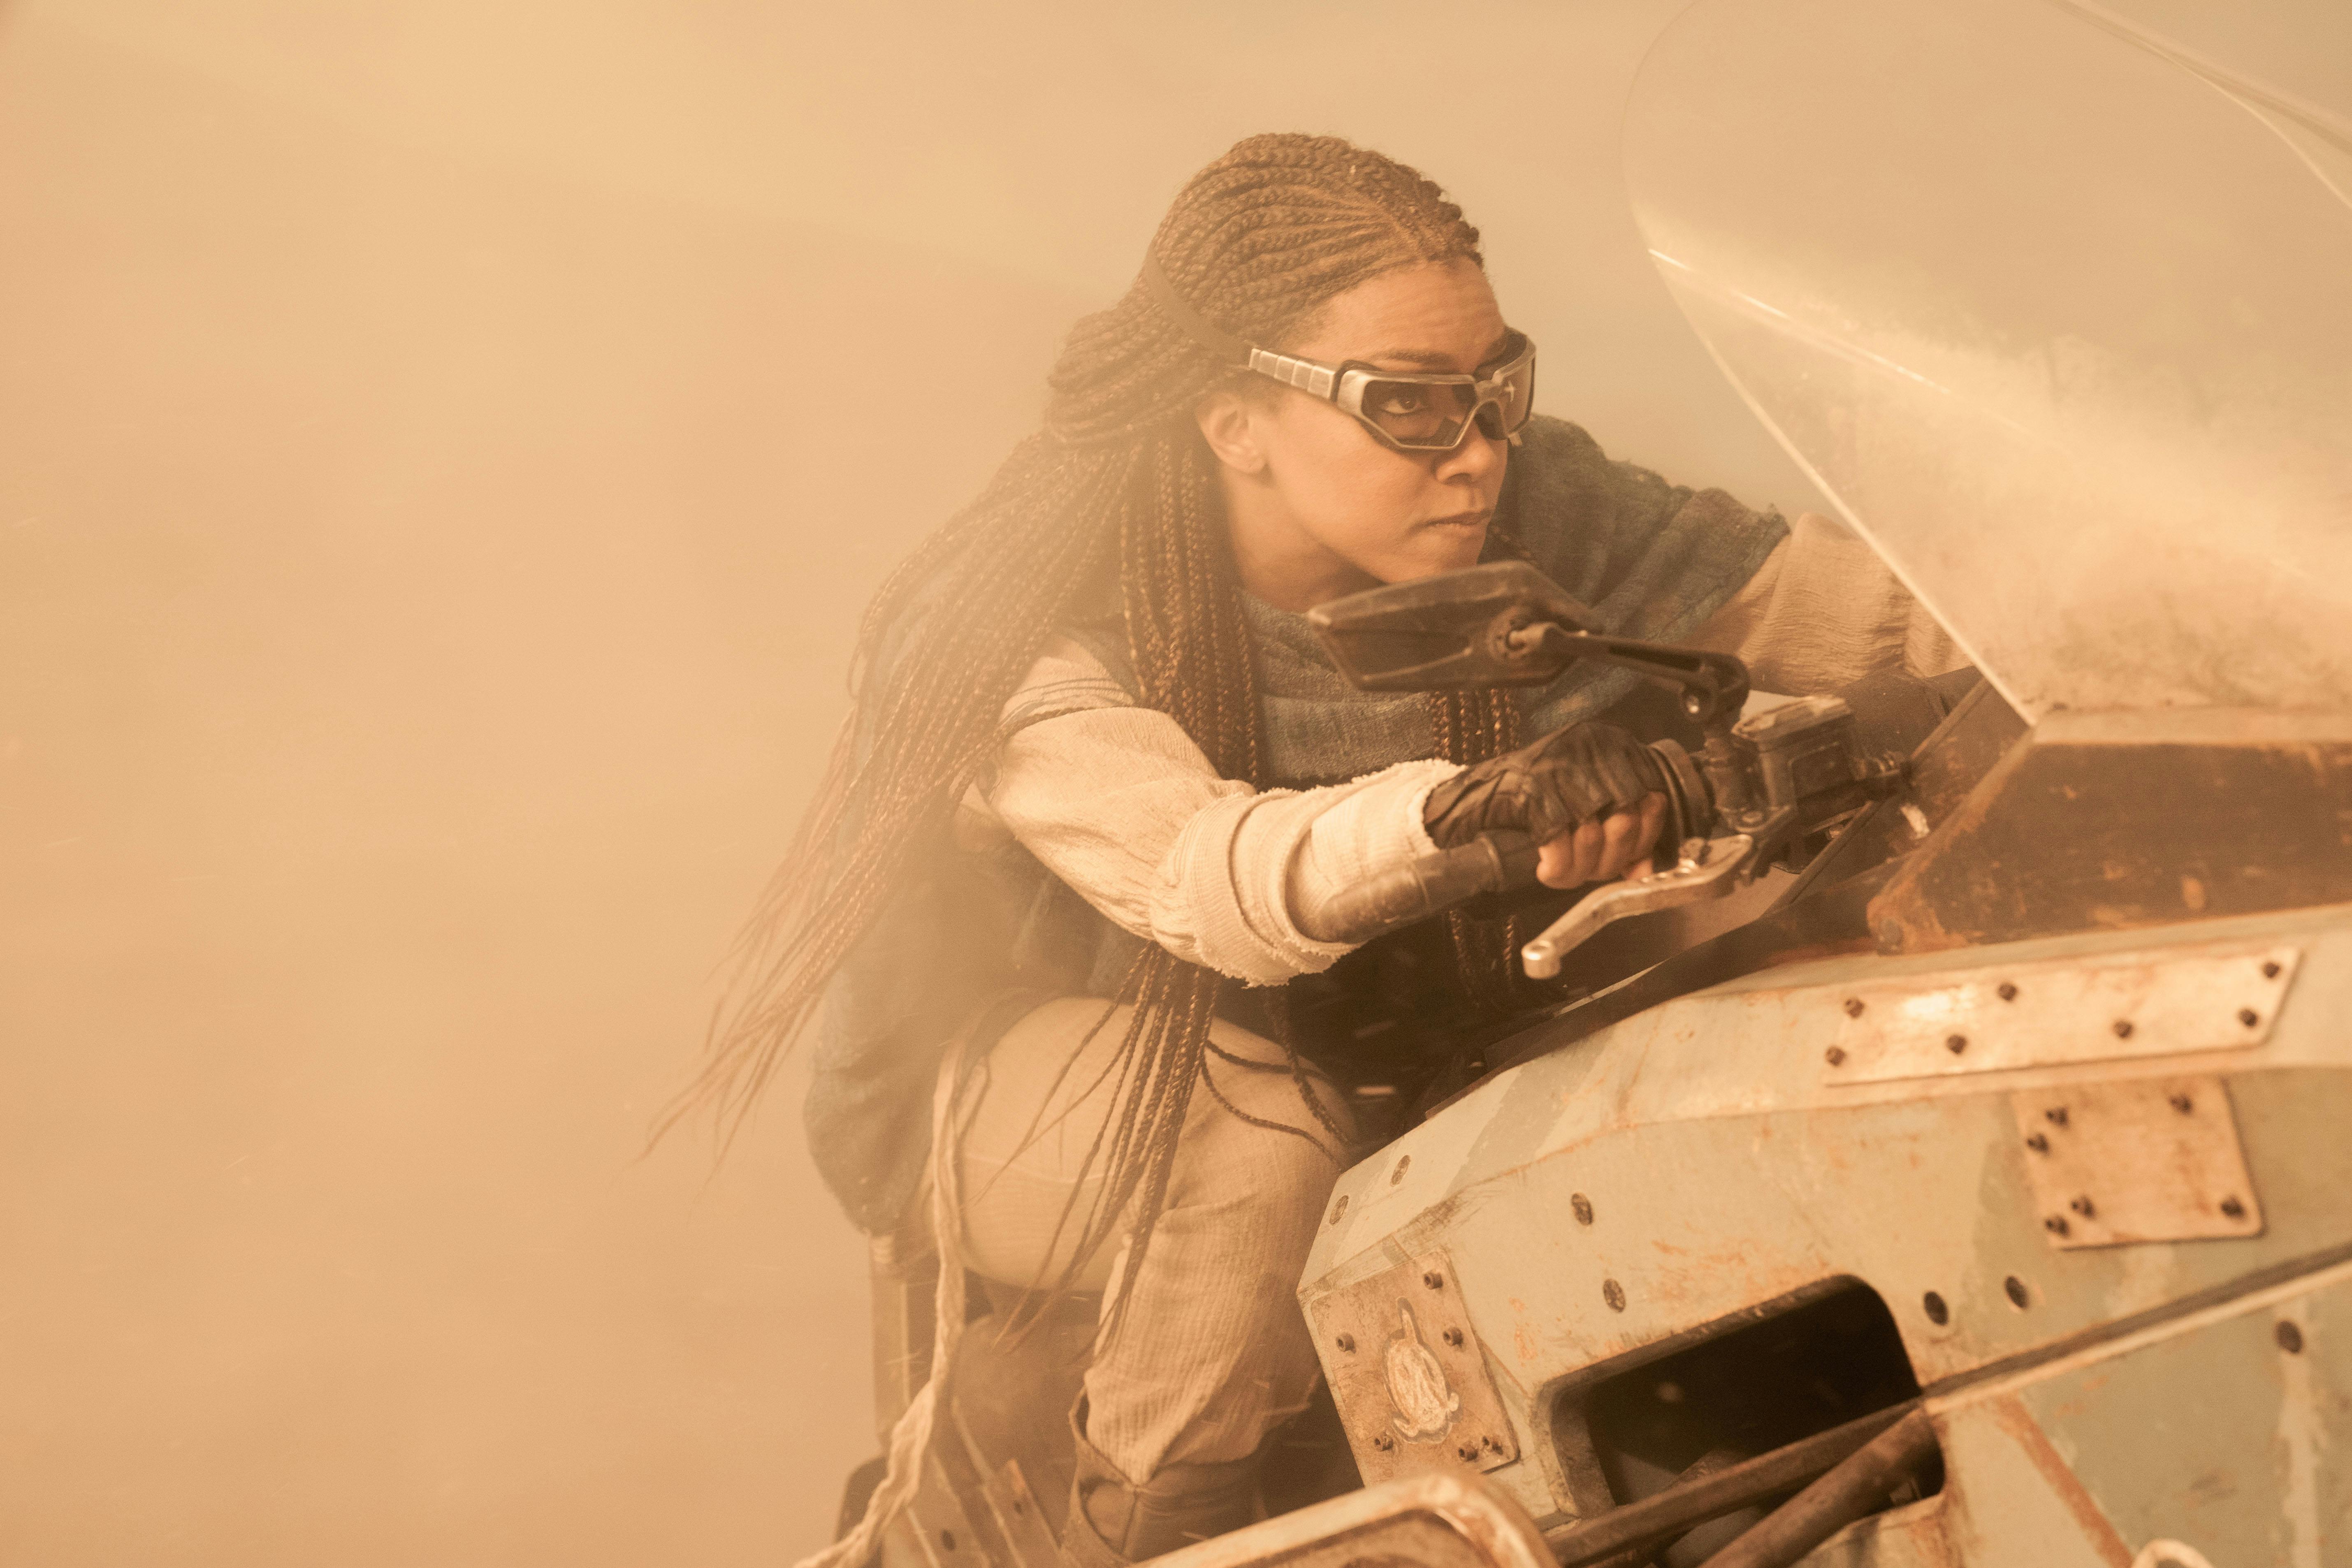 Burnham on hot pursuit on a cruiser in a dusty environment in a first look at Star Trek: Discovery Season 5 